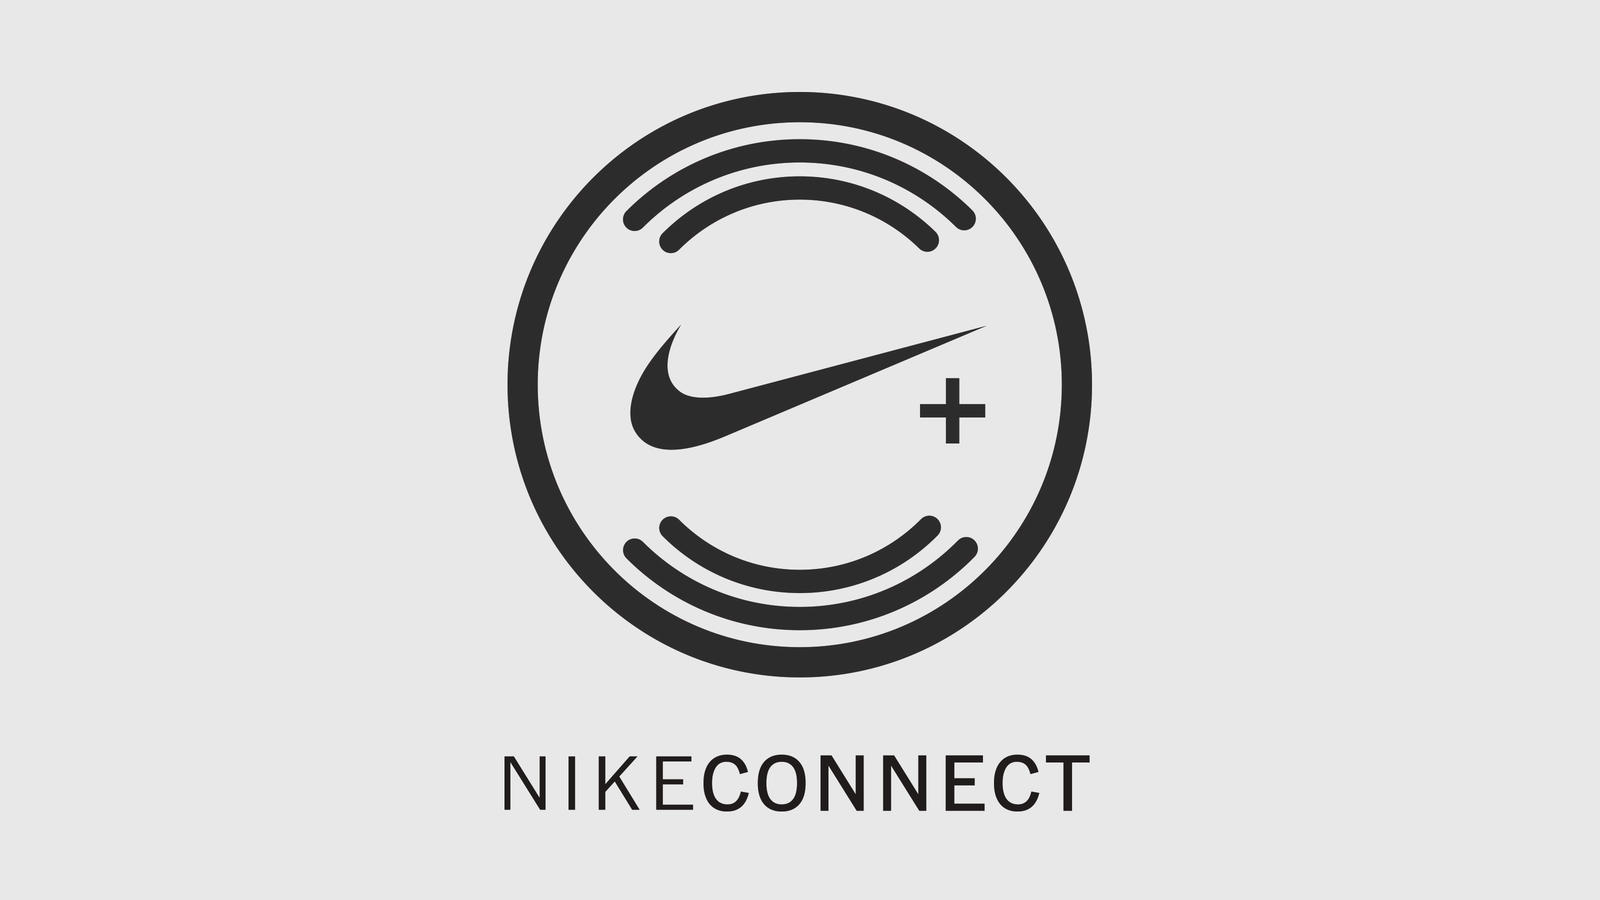 What is NikeConnect?